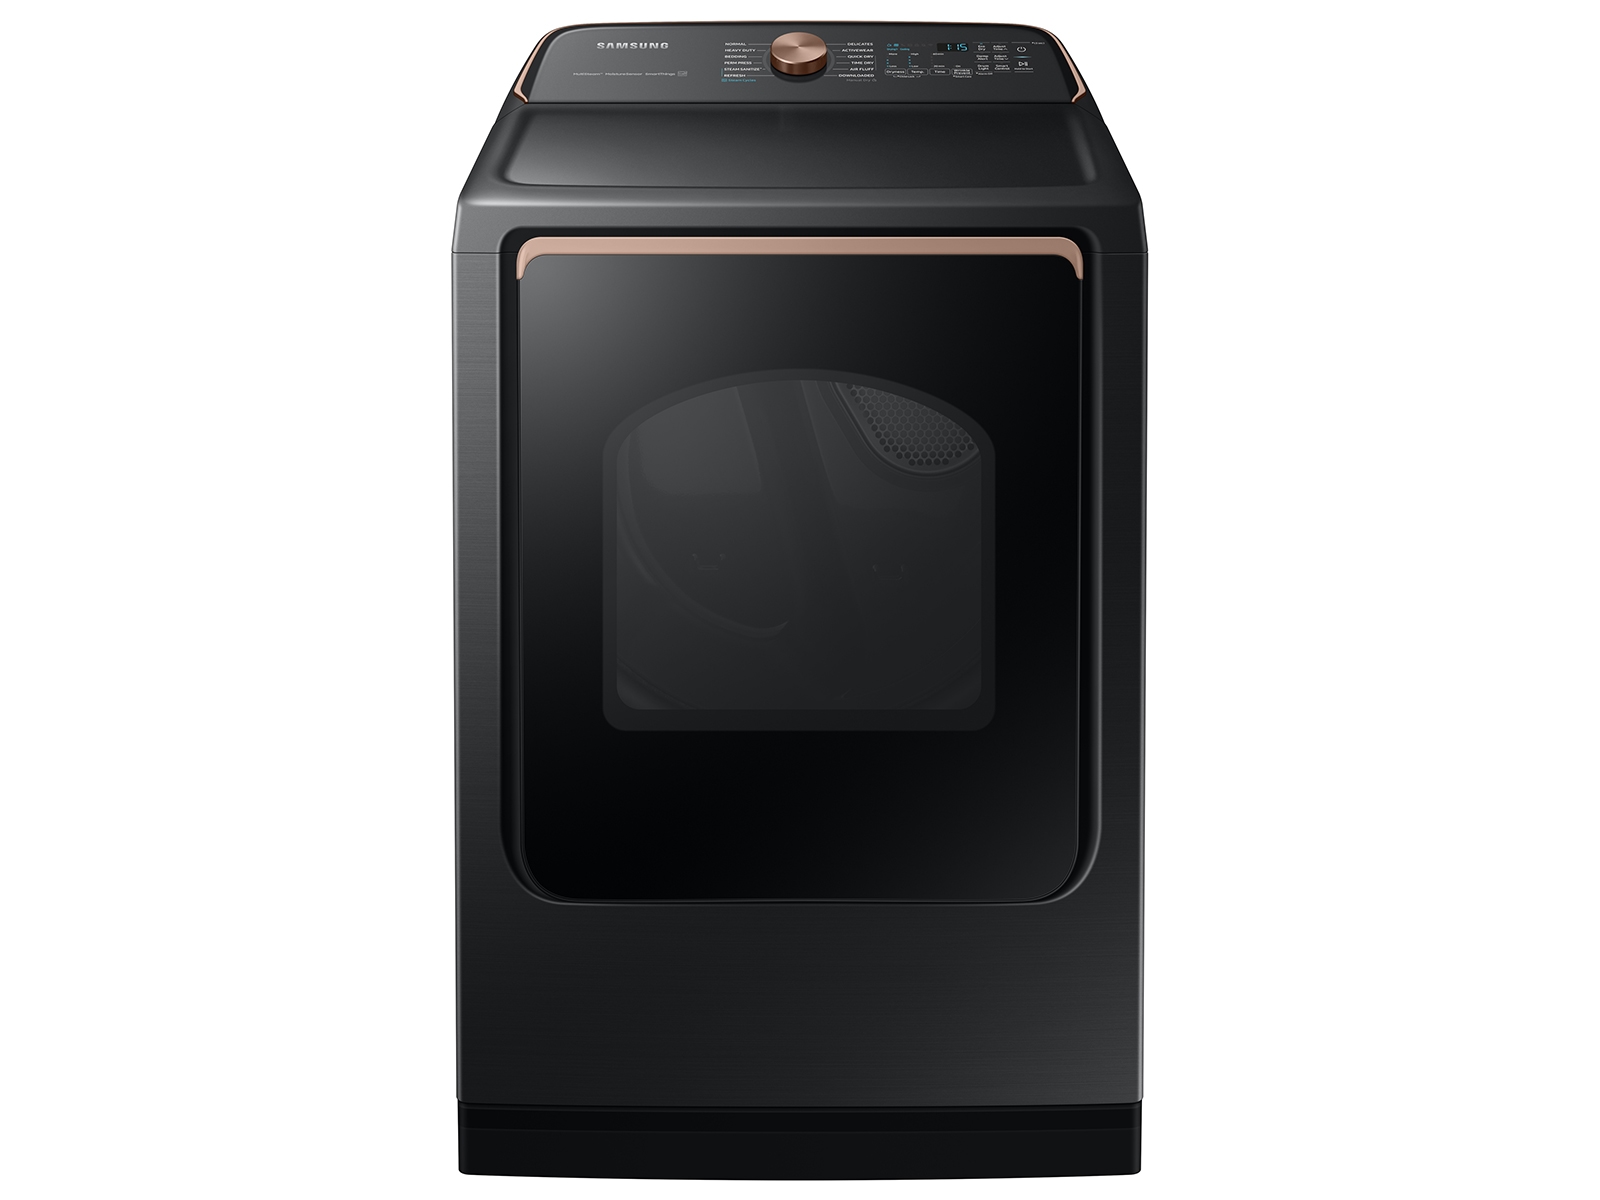 Photos - Tumble Dryer Samsung 7.4 cu. ft. Smart Electric Dryer with Steam Sanitize+ in Brushed B 